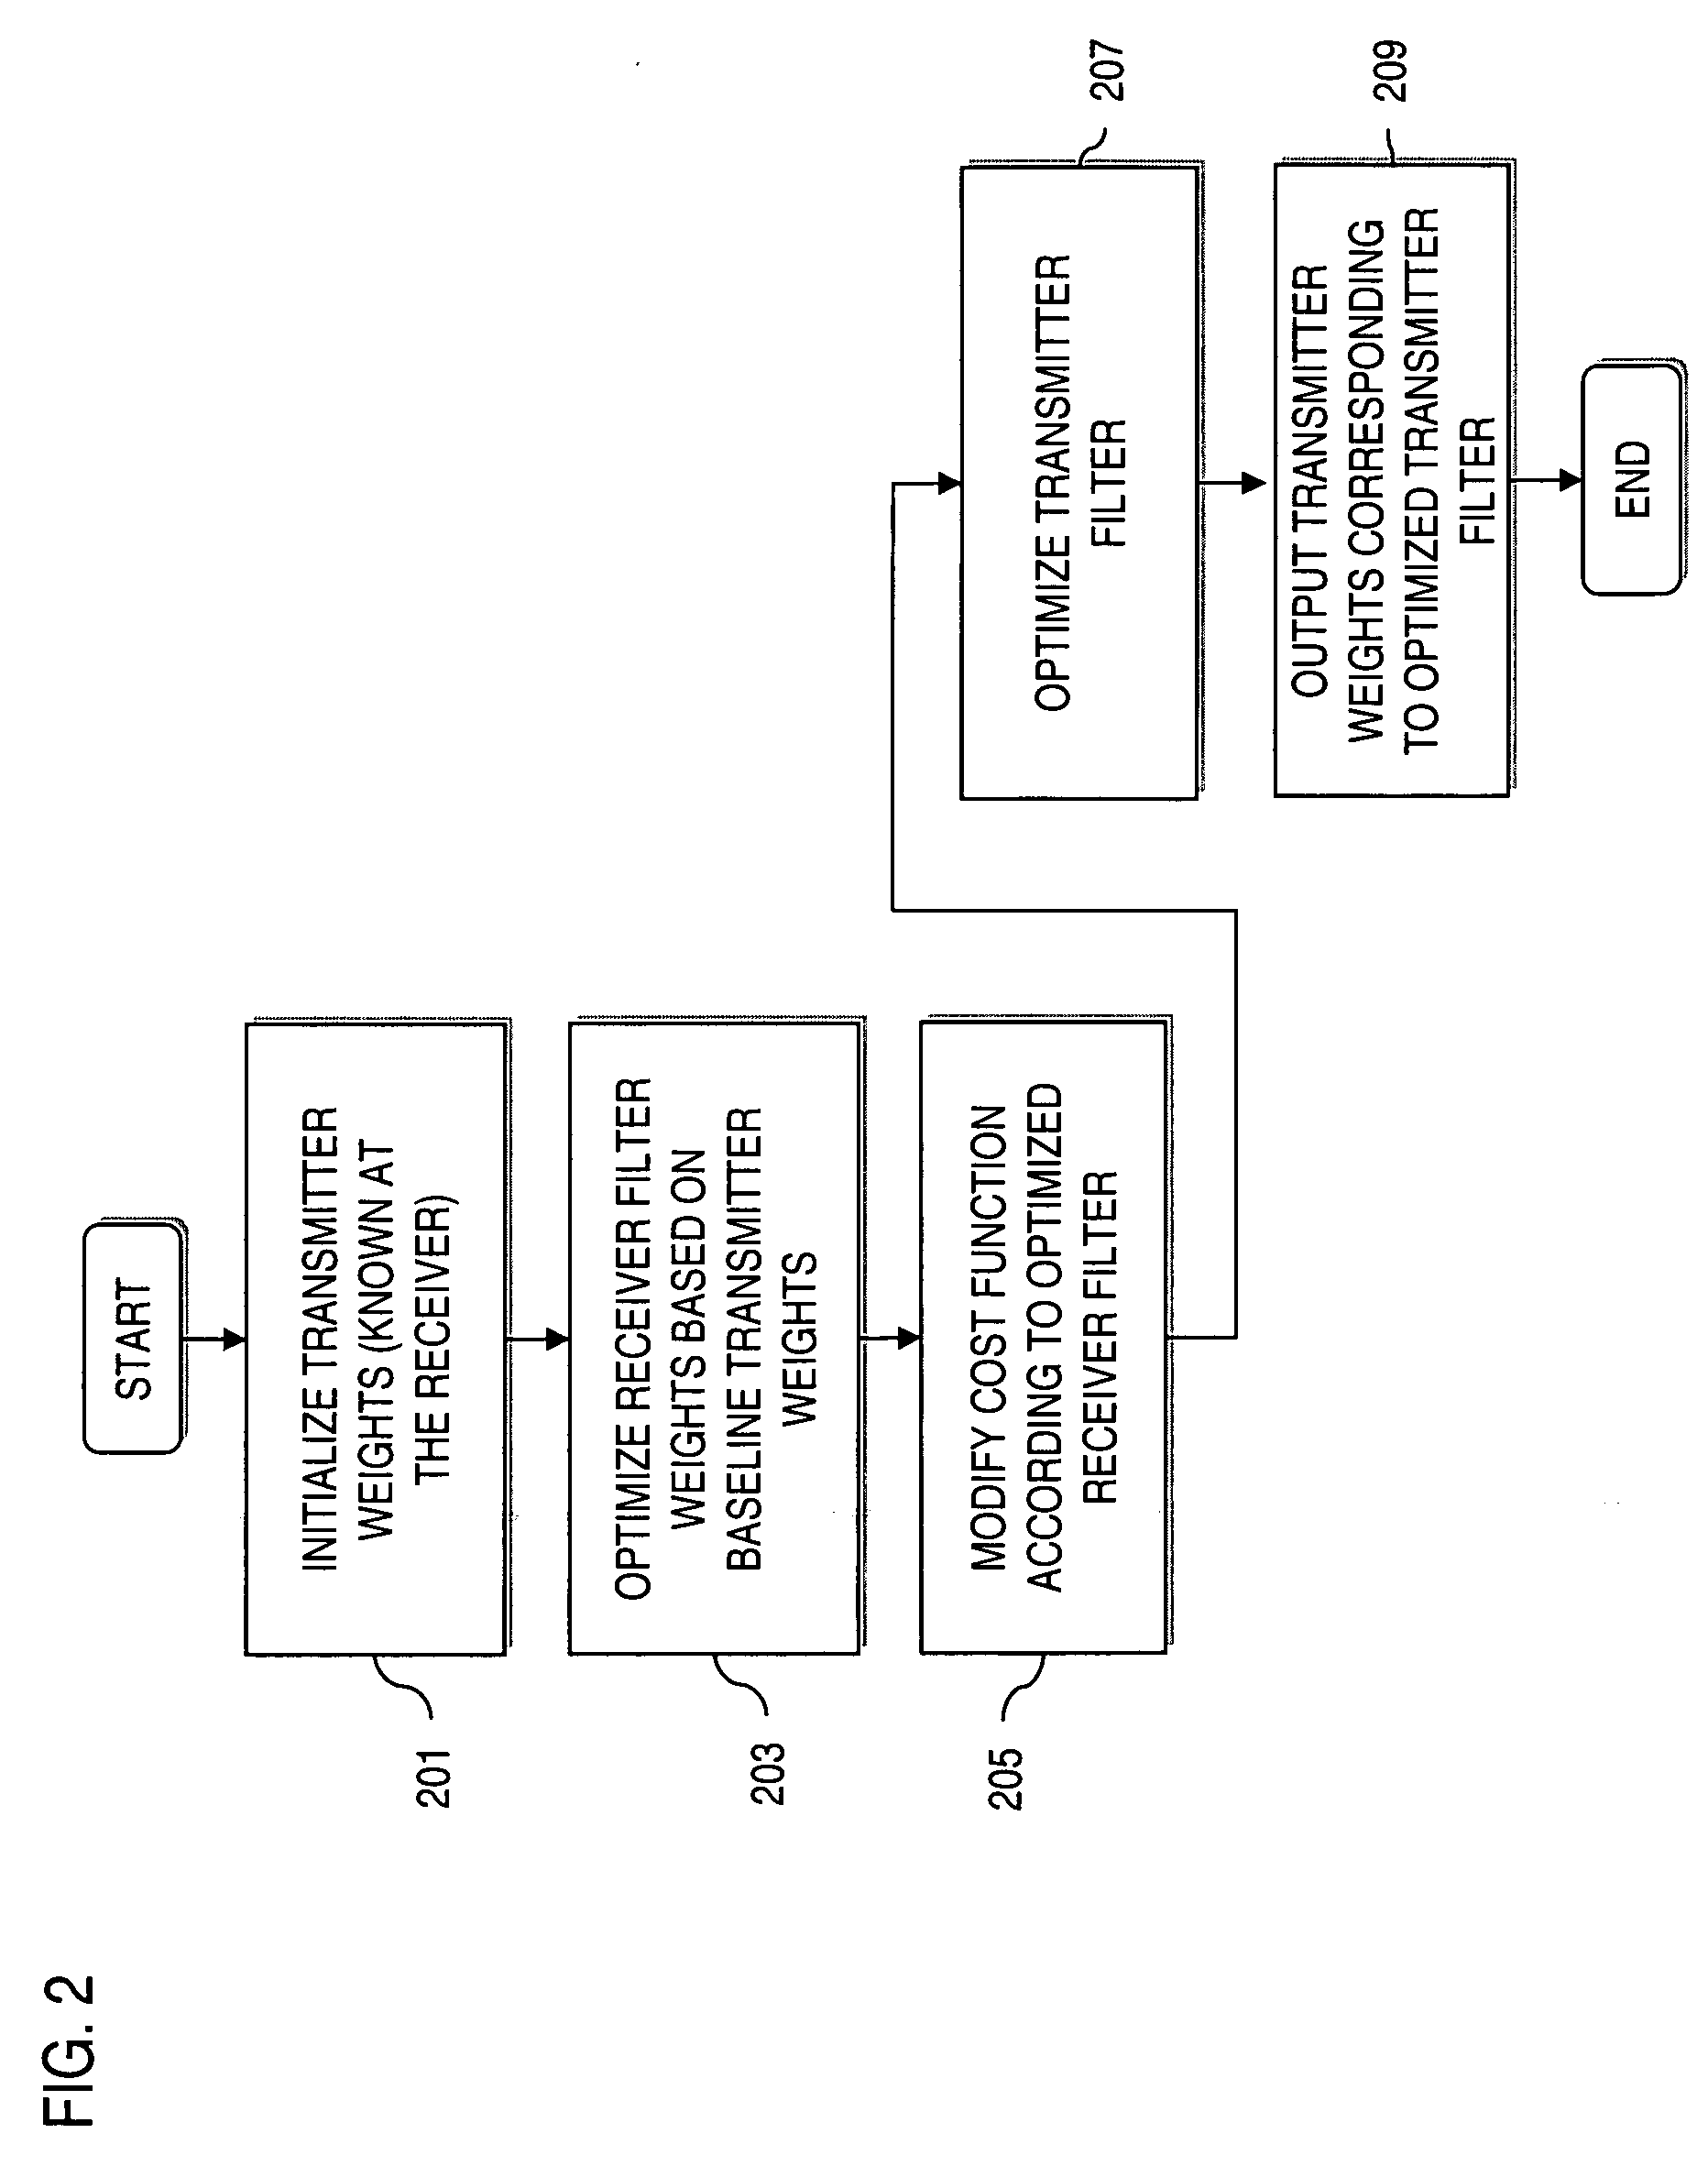 Method and apparatus for estimating transmit weights for multiple antennas